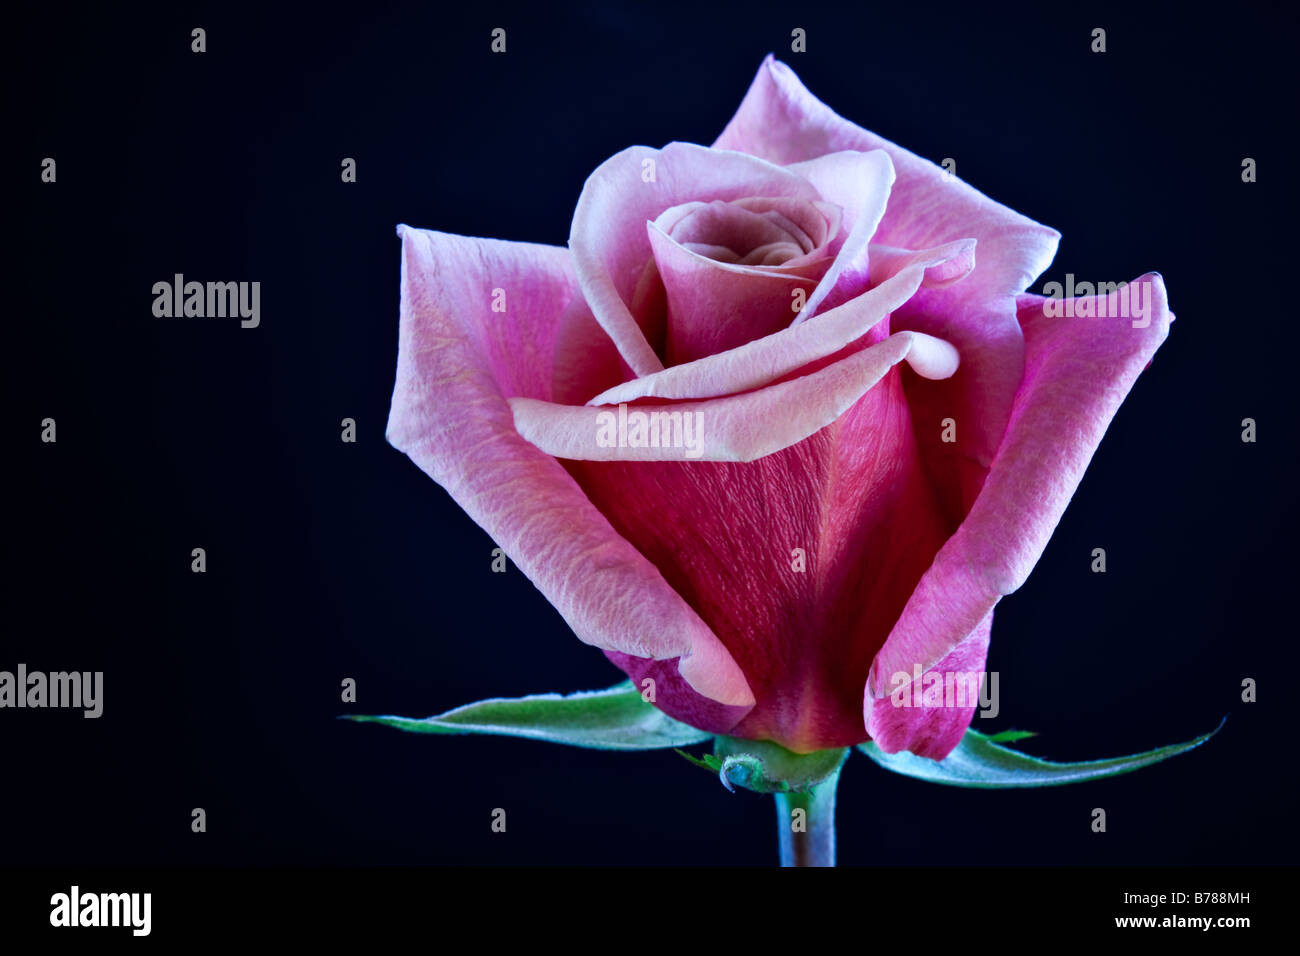 Single long-stemmed pink rose on dark blue background with copy space Stock Photo